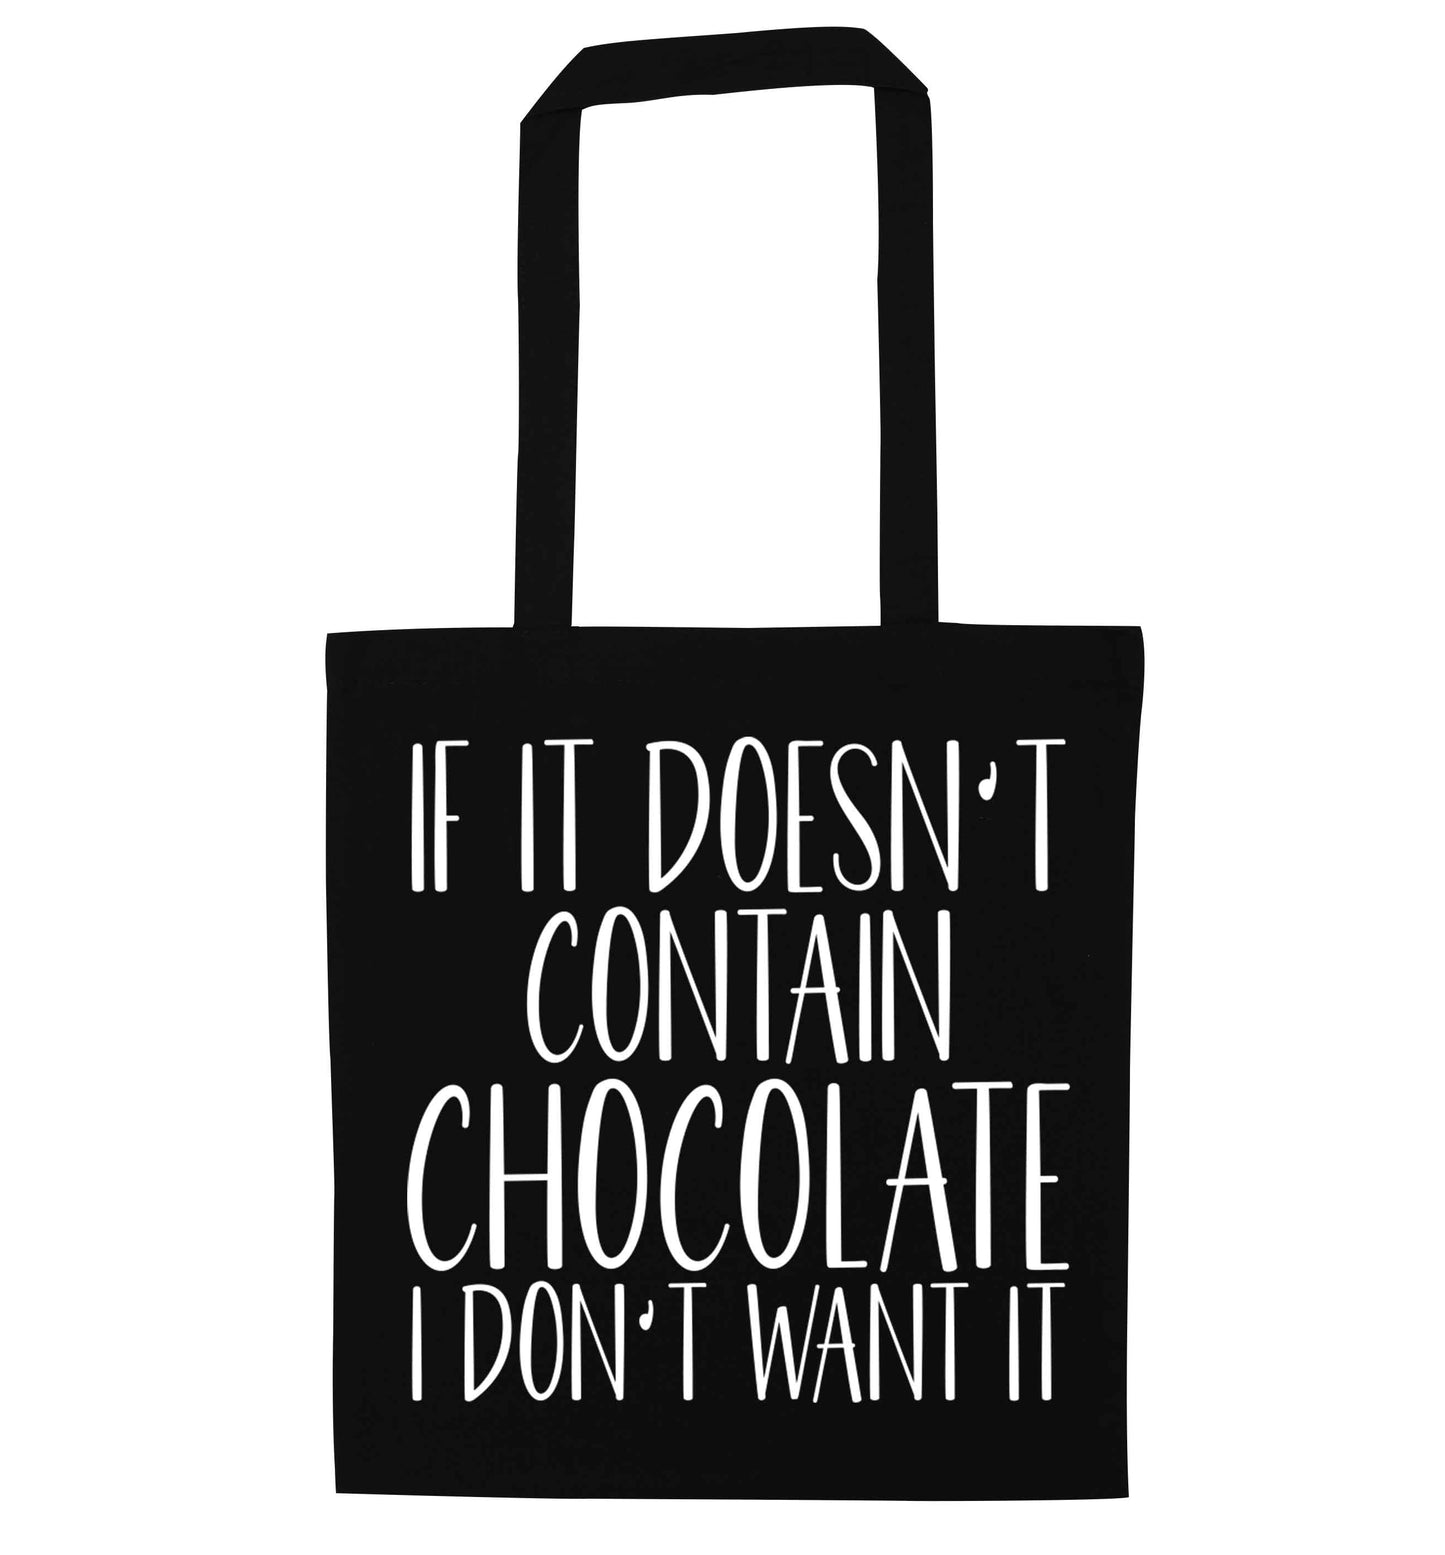 If it doesn't contain chocolate I don't want it black tote bag